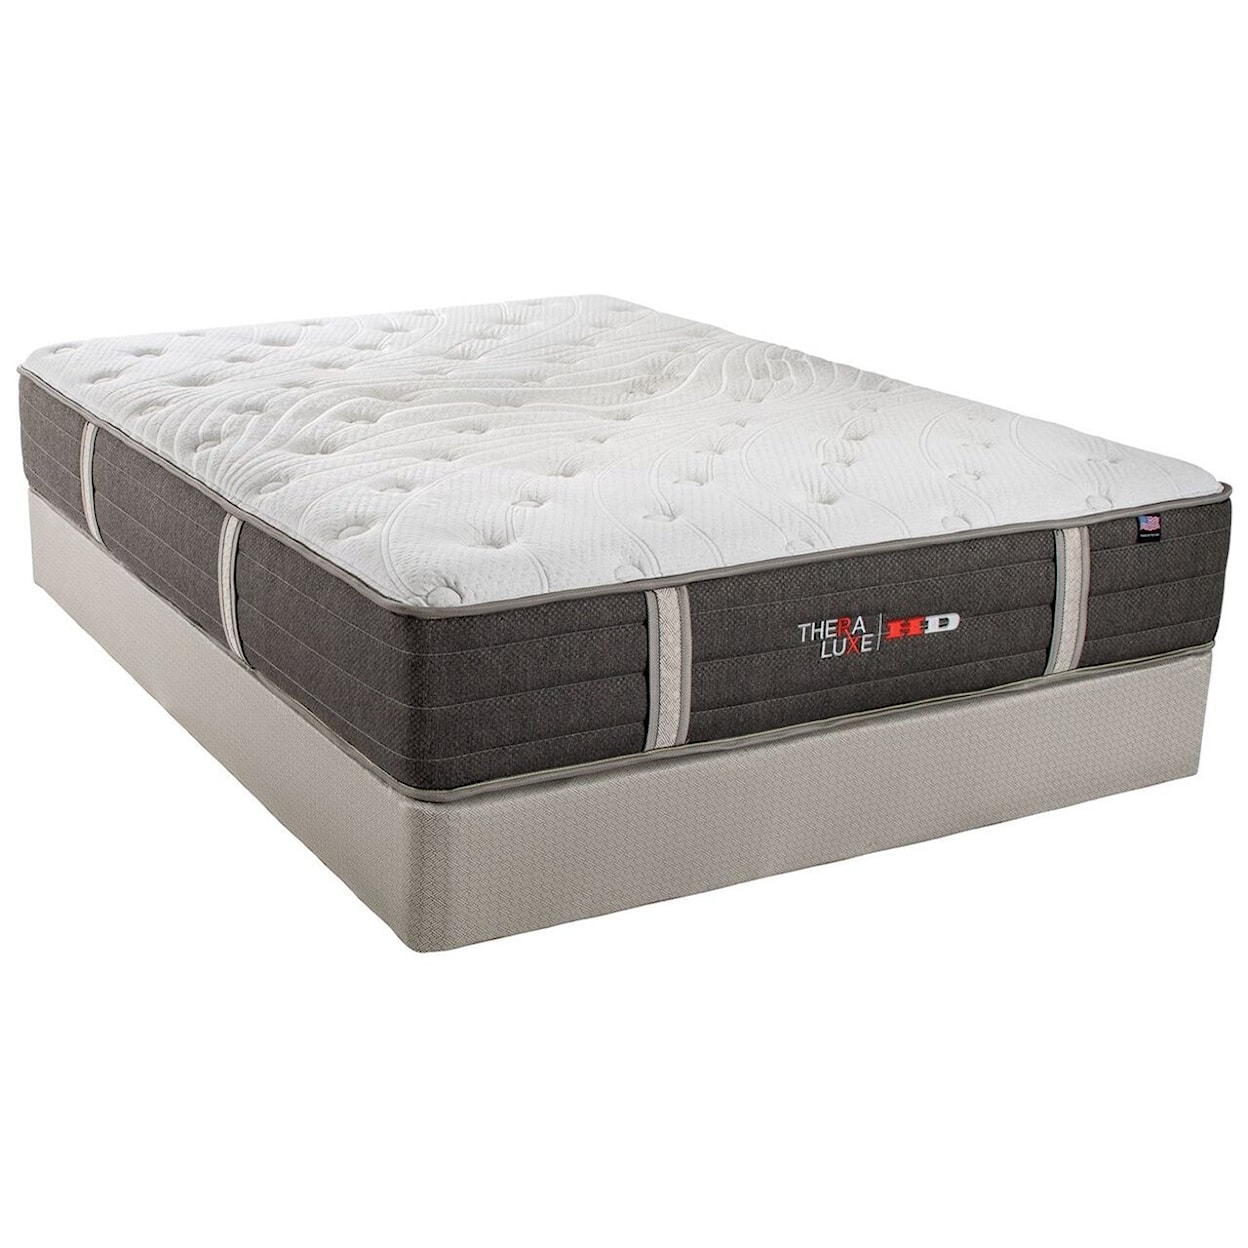 Therapedic Thera Luxe HD Balsam Twin XL Firm Pocketed Coil Mattress Set